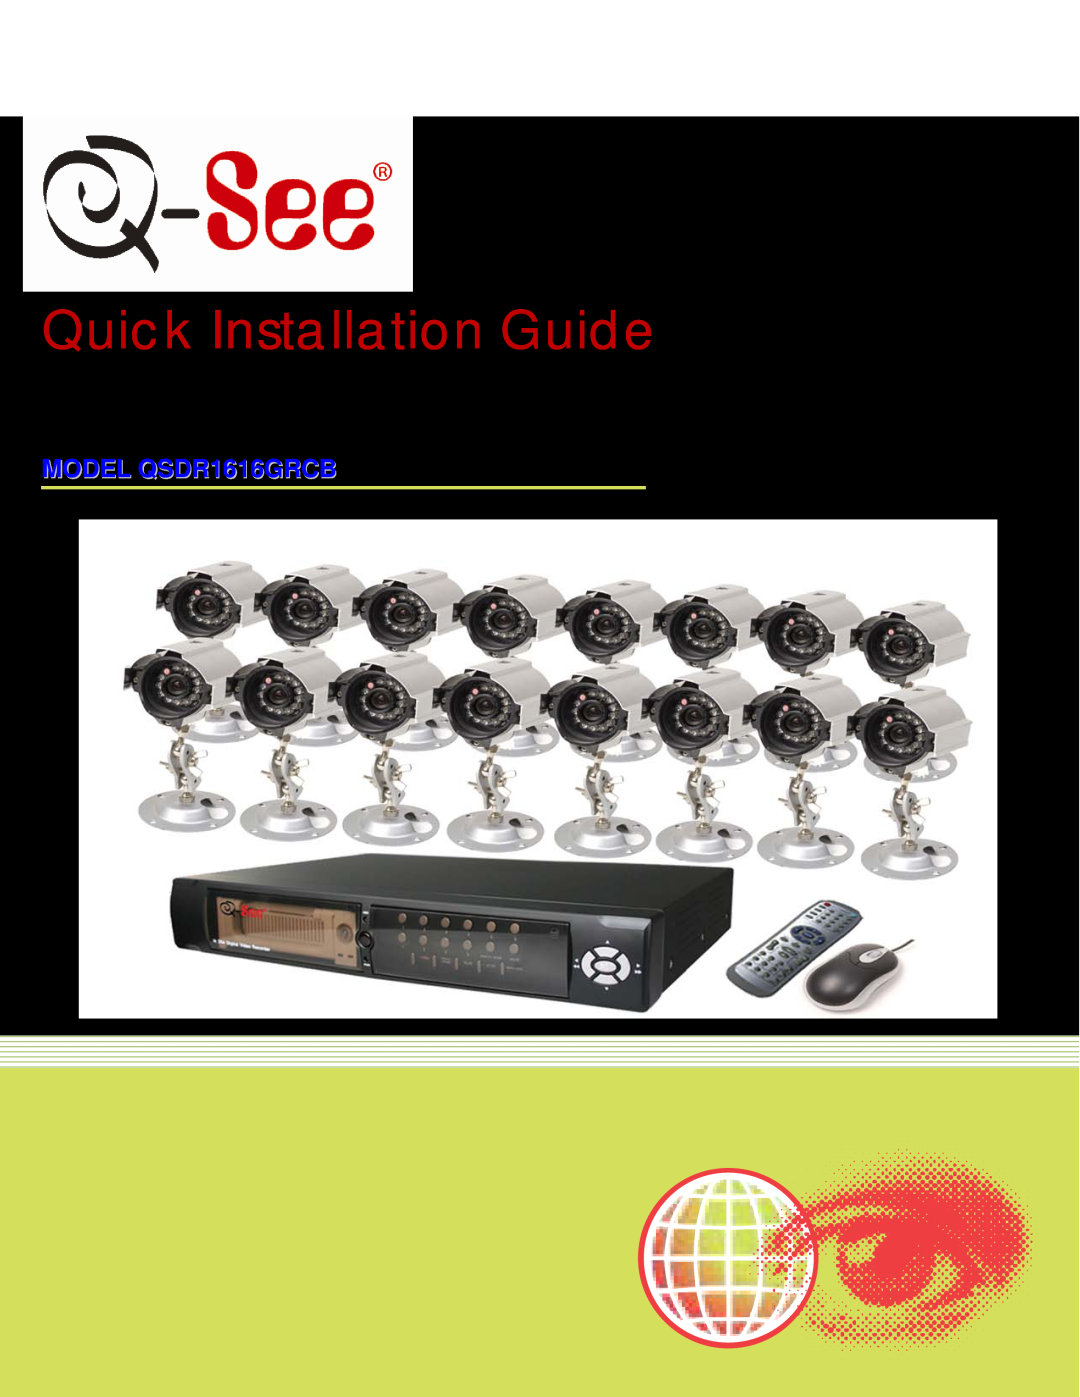 Q-See qsdr1616grcb manual Quick Installation Guide, Channel H.264 Compression DVR with CIF Real-Time Recording and 